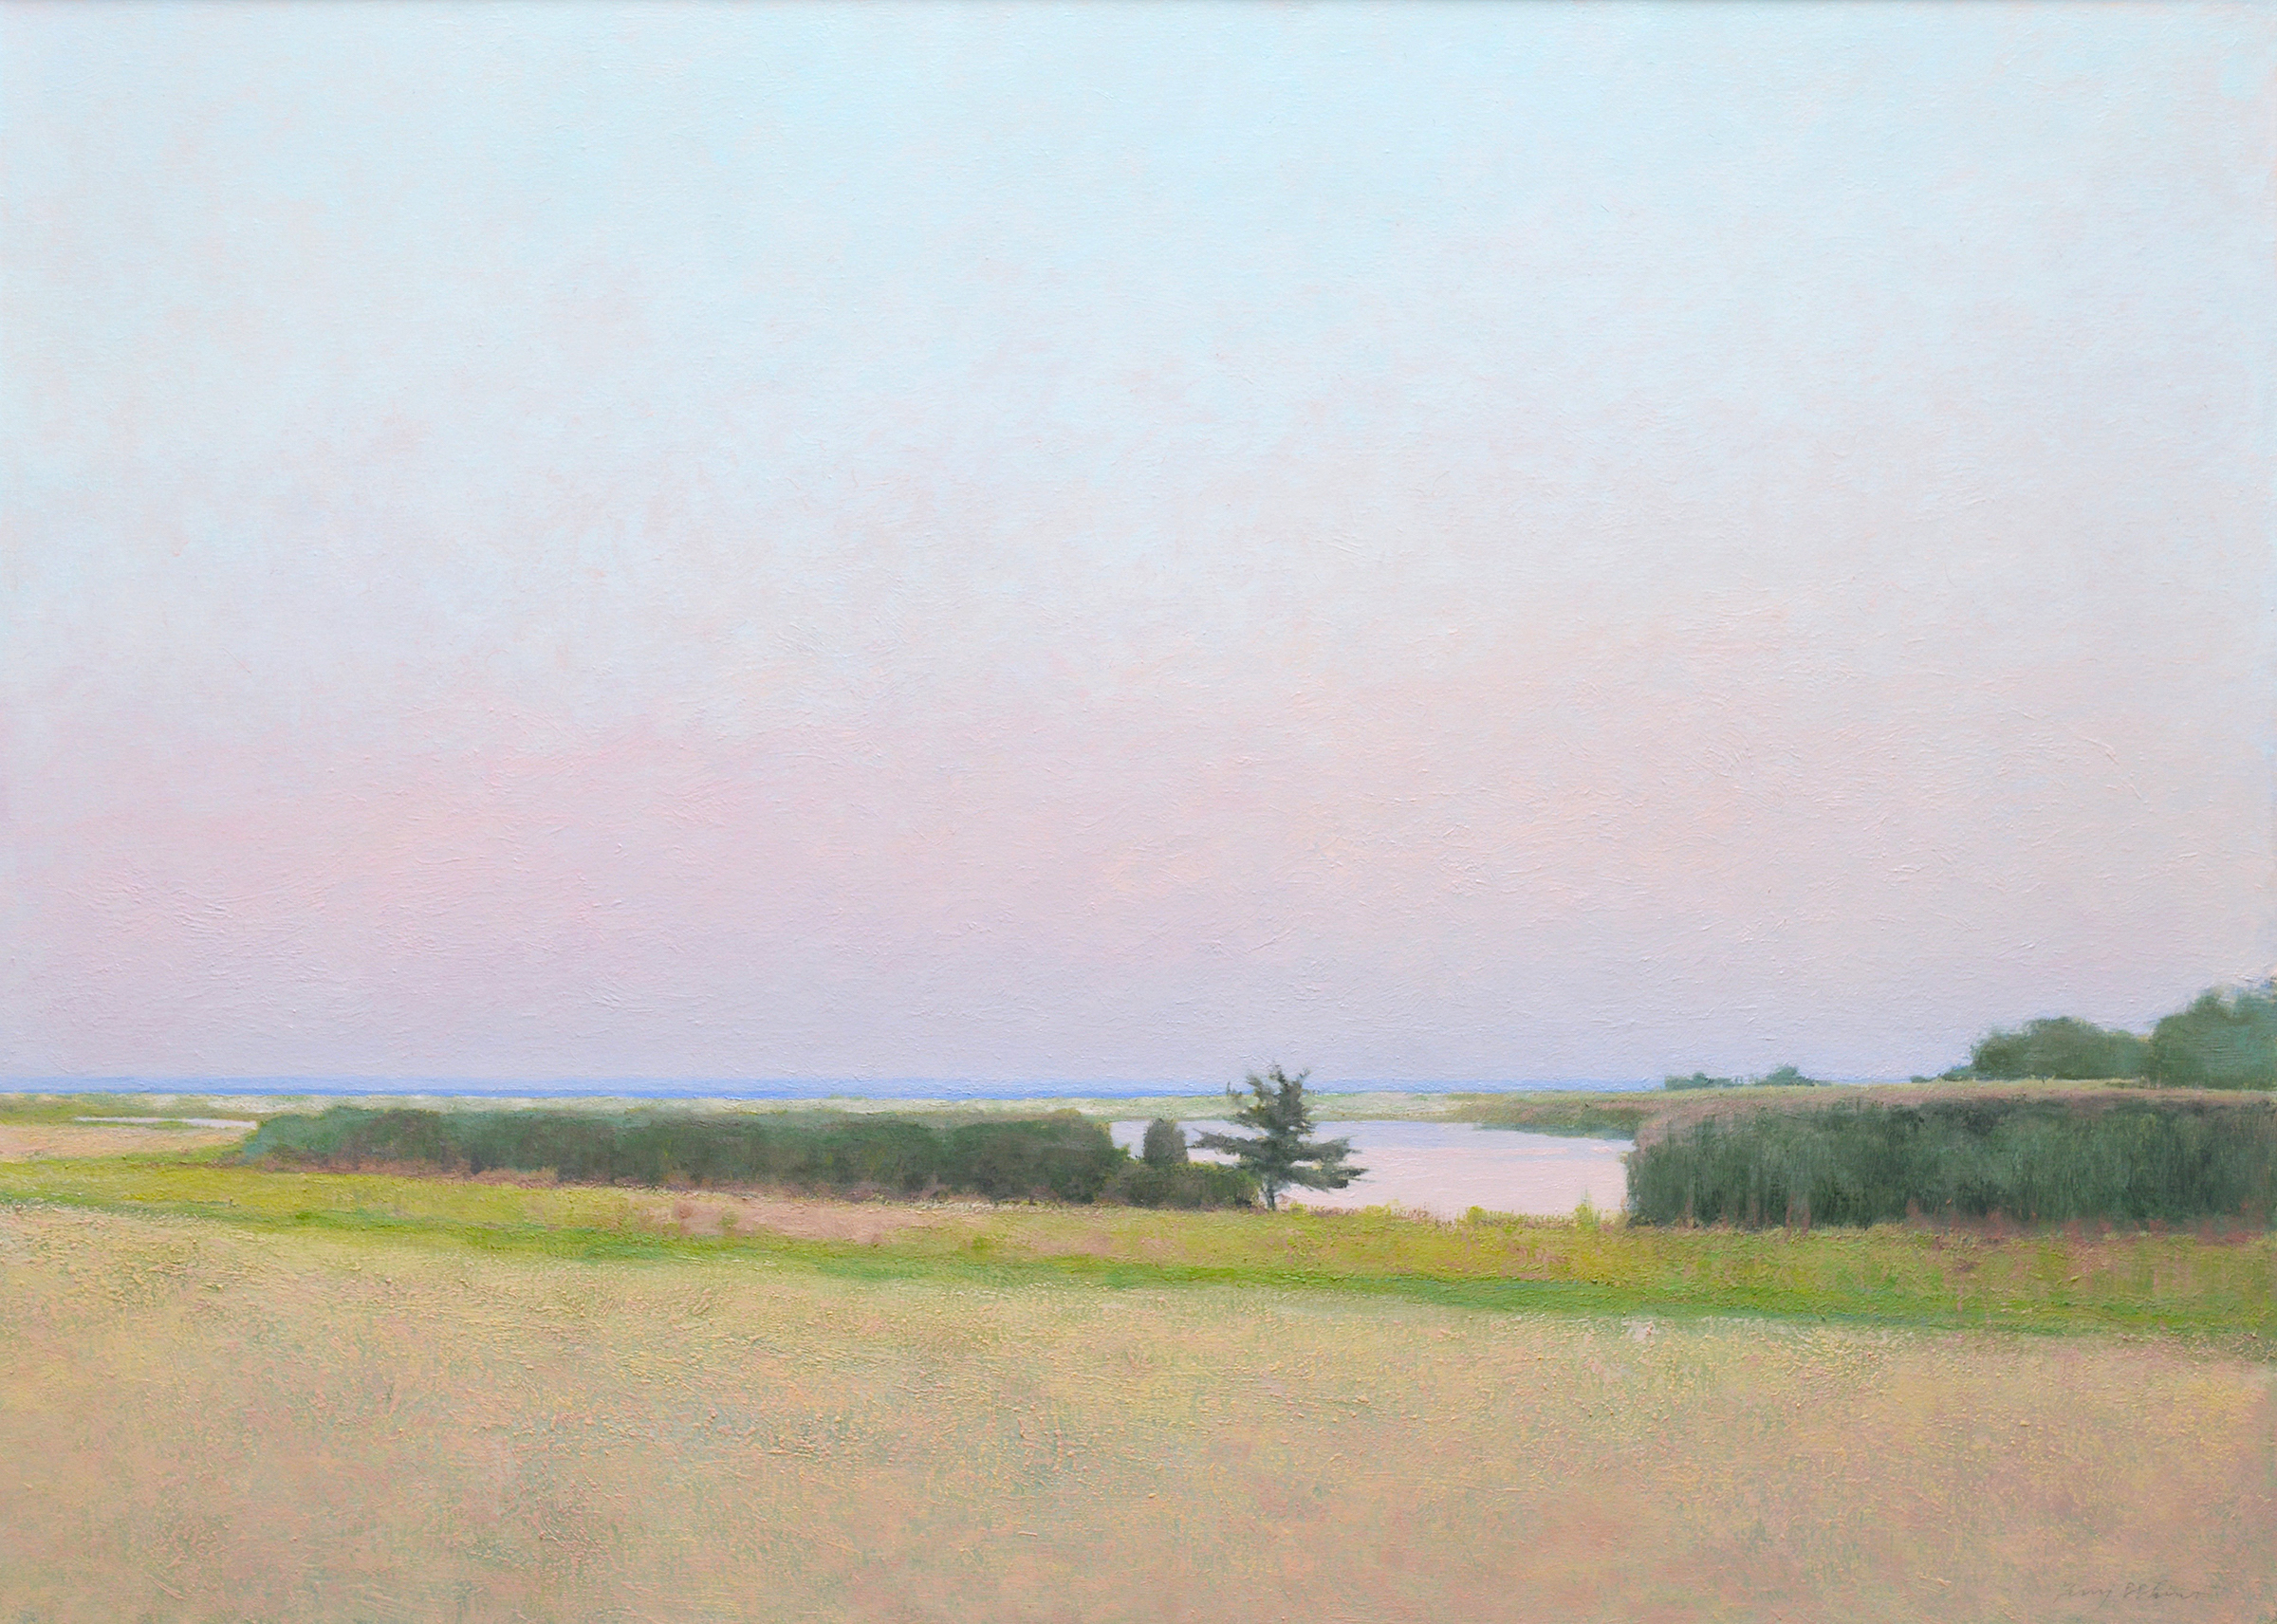 "Peter’s Pond" by Terry Elkins, on view at MM Fine Art in the Hamptons